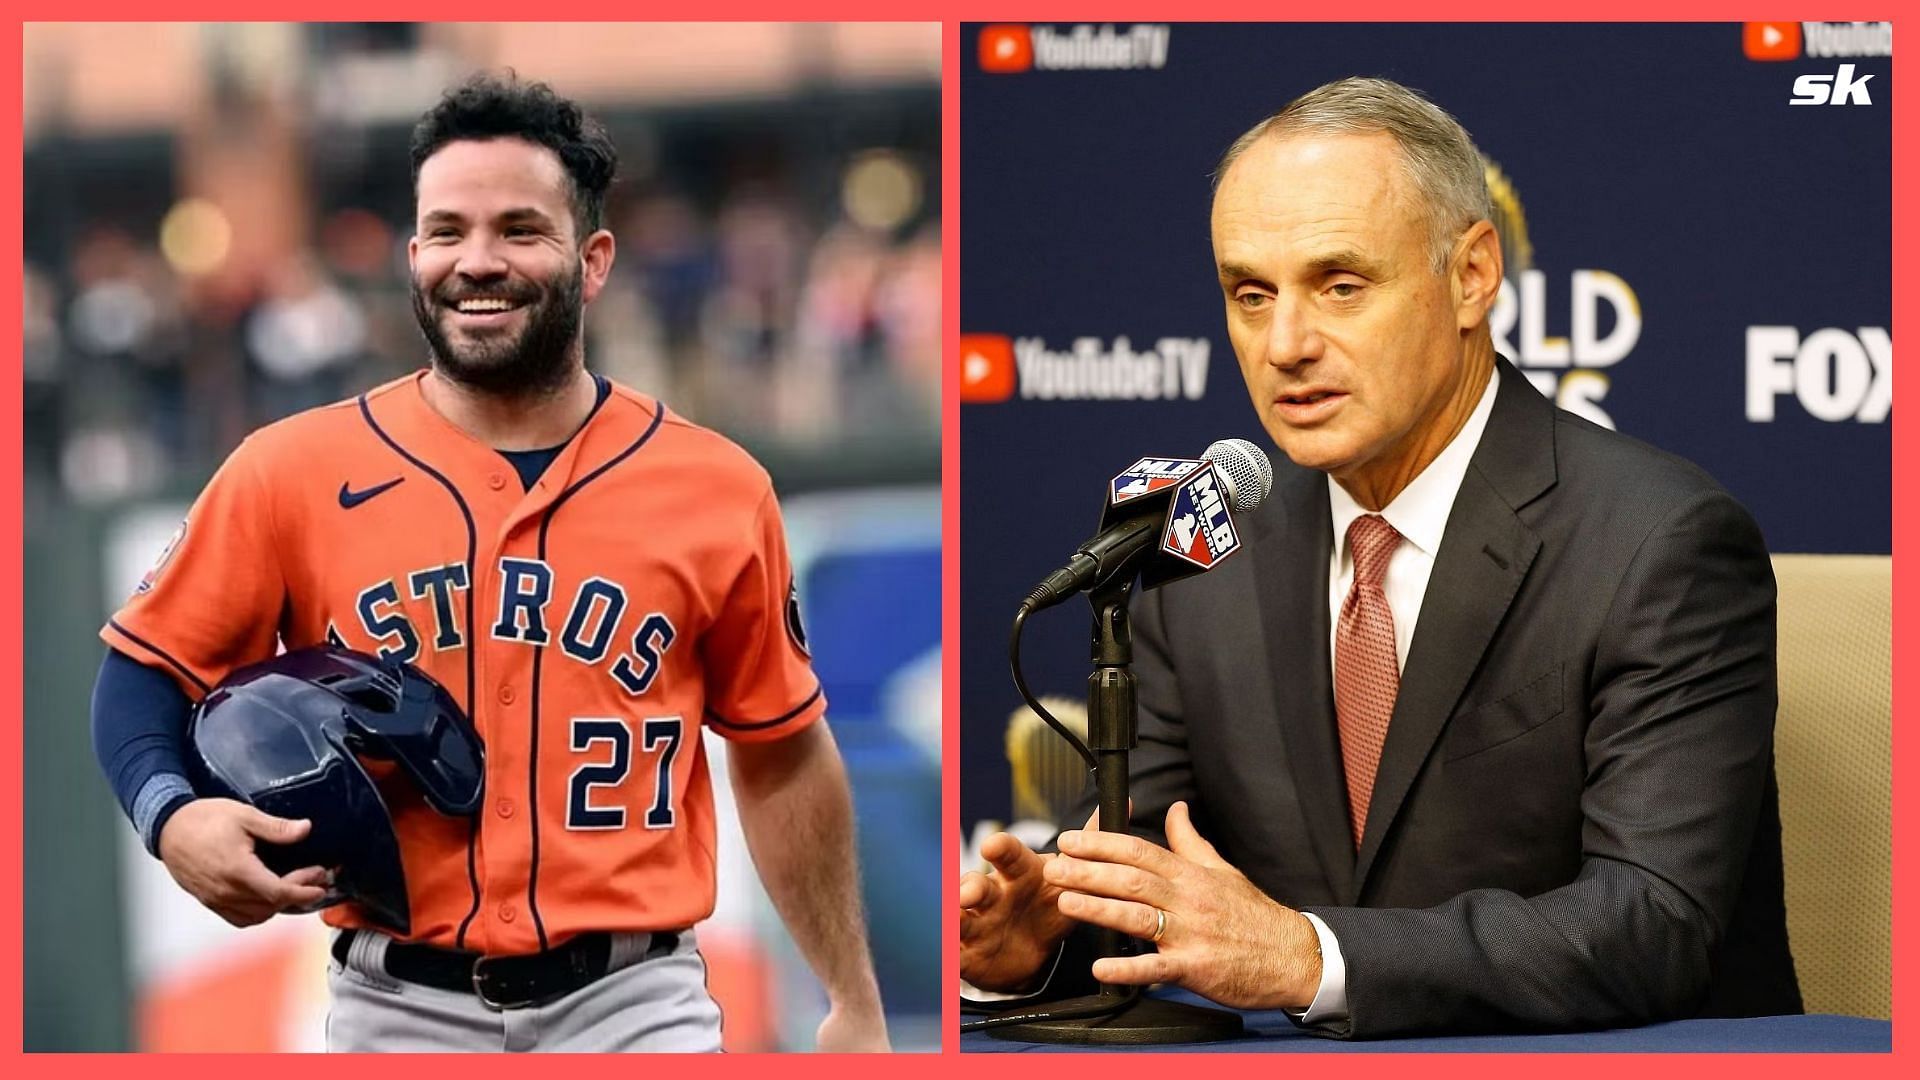 Why Jose Altuve did not want his Jersey removed. - The Crawfish Boxes